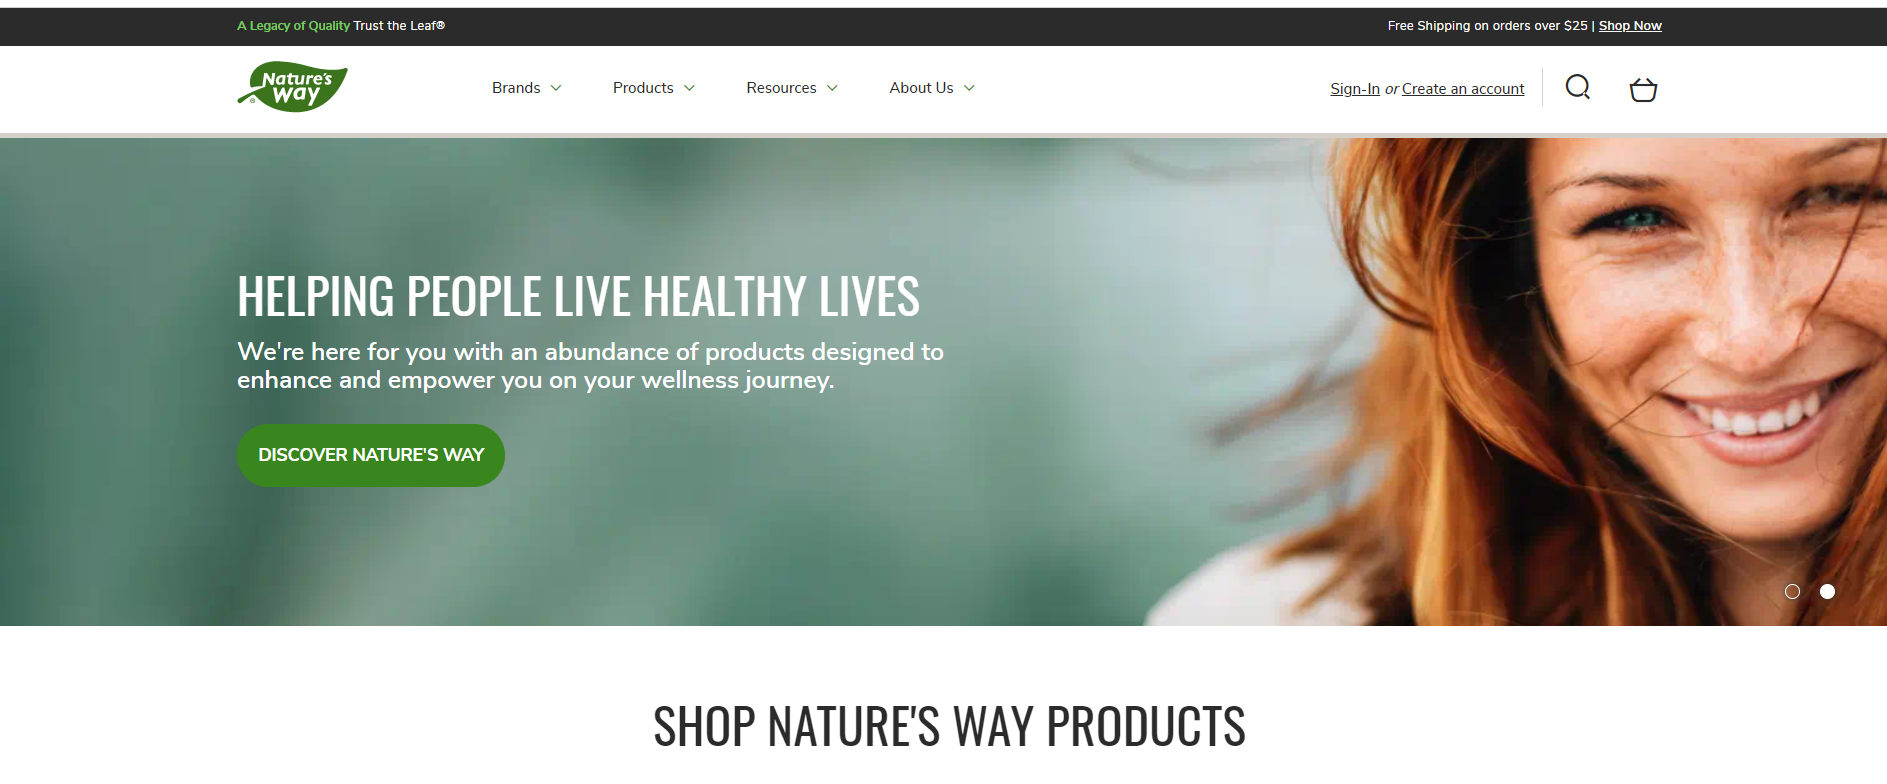 Official website of Nature’s Way supplement brand